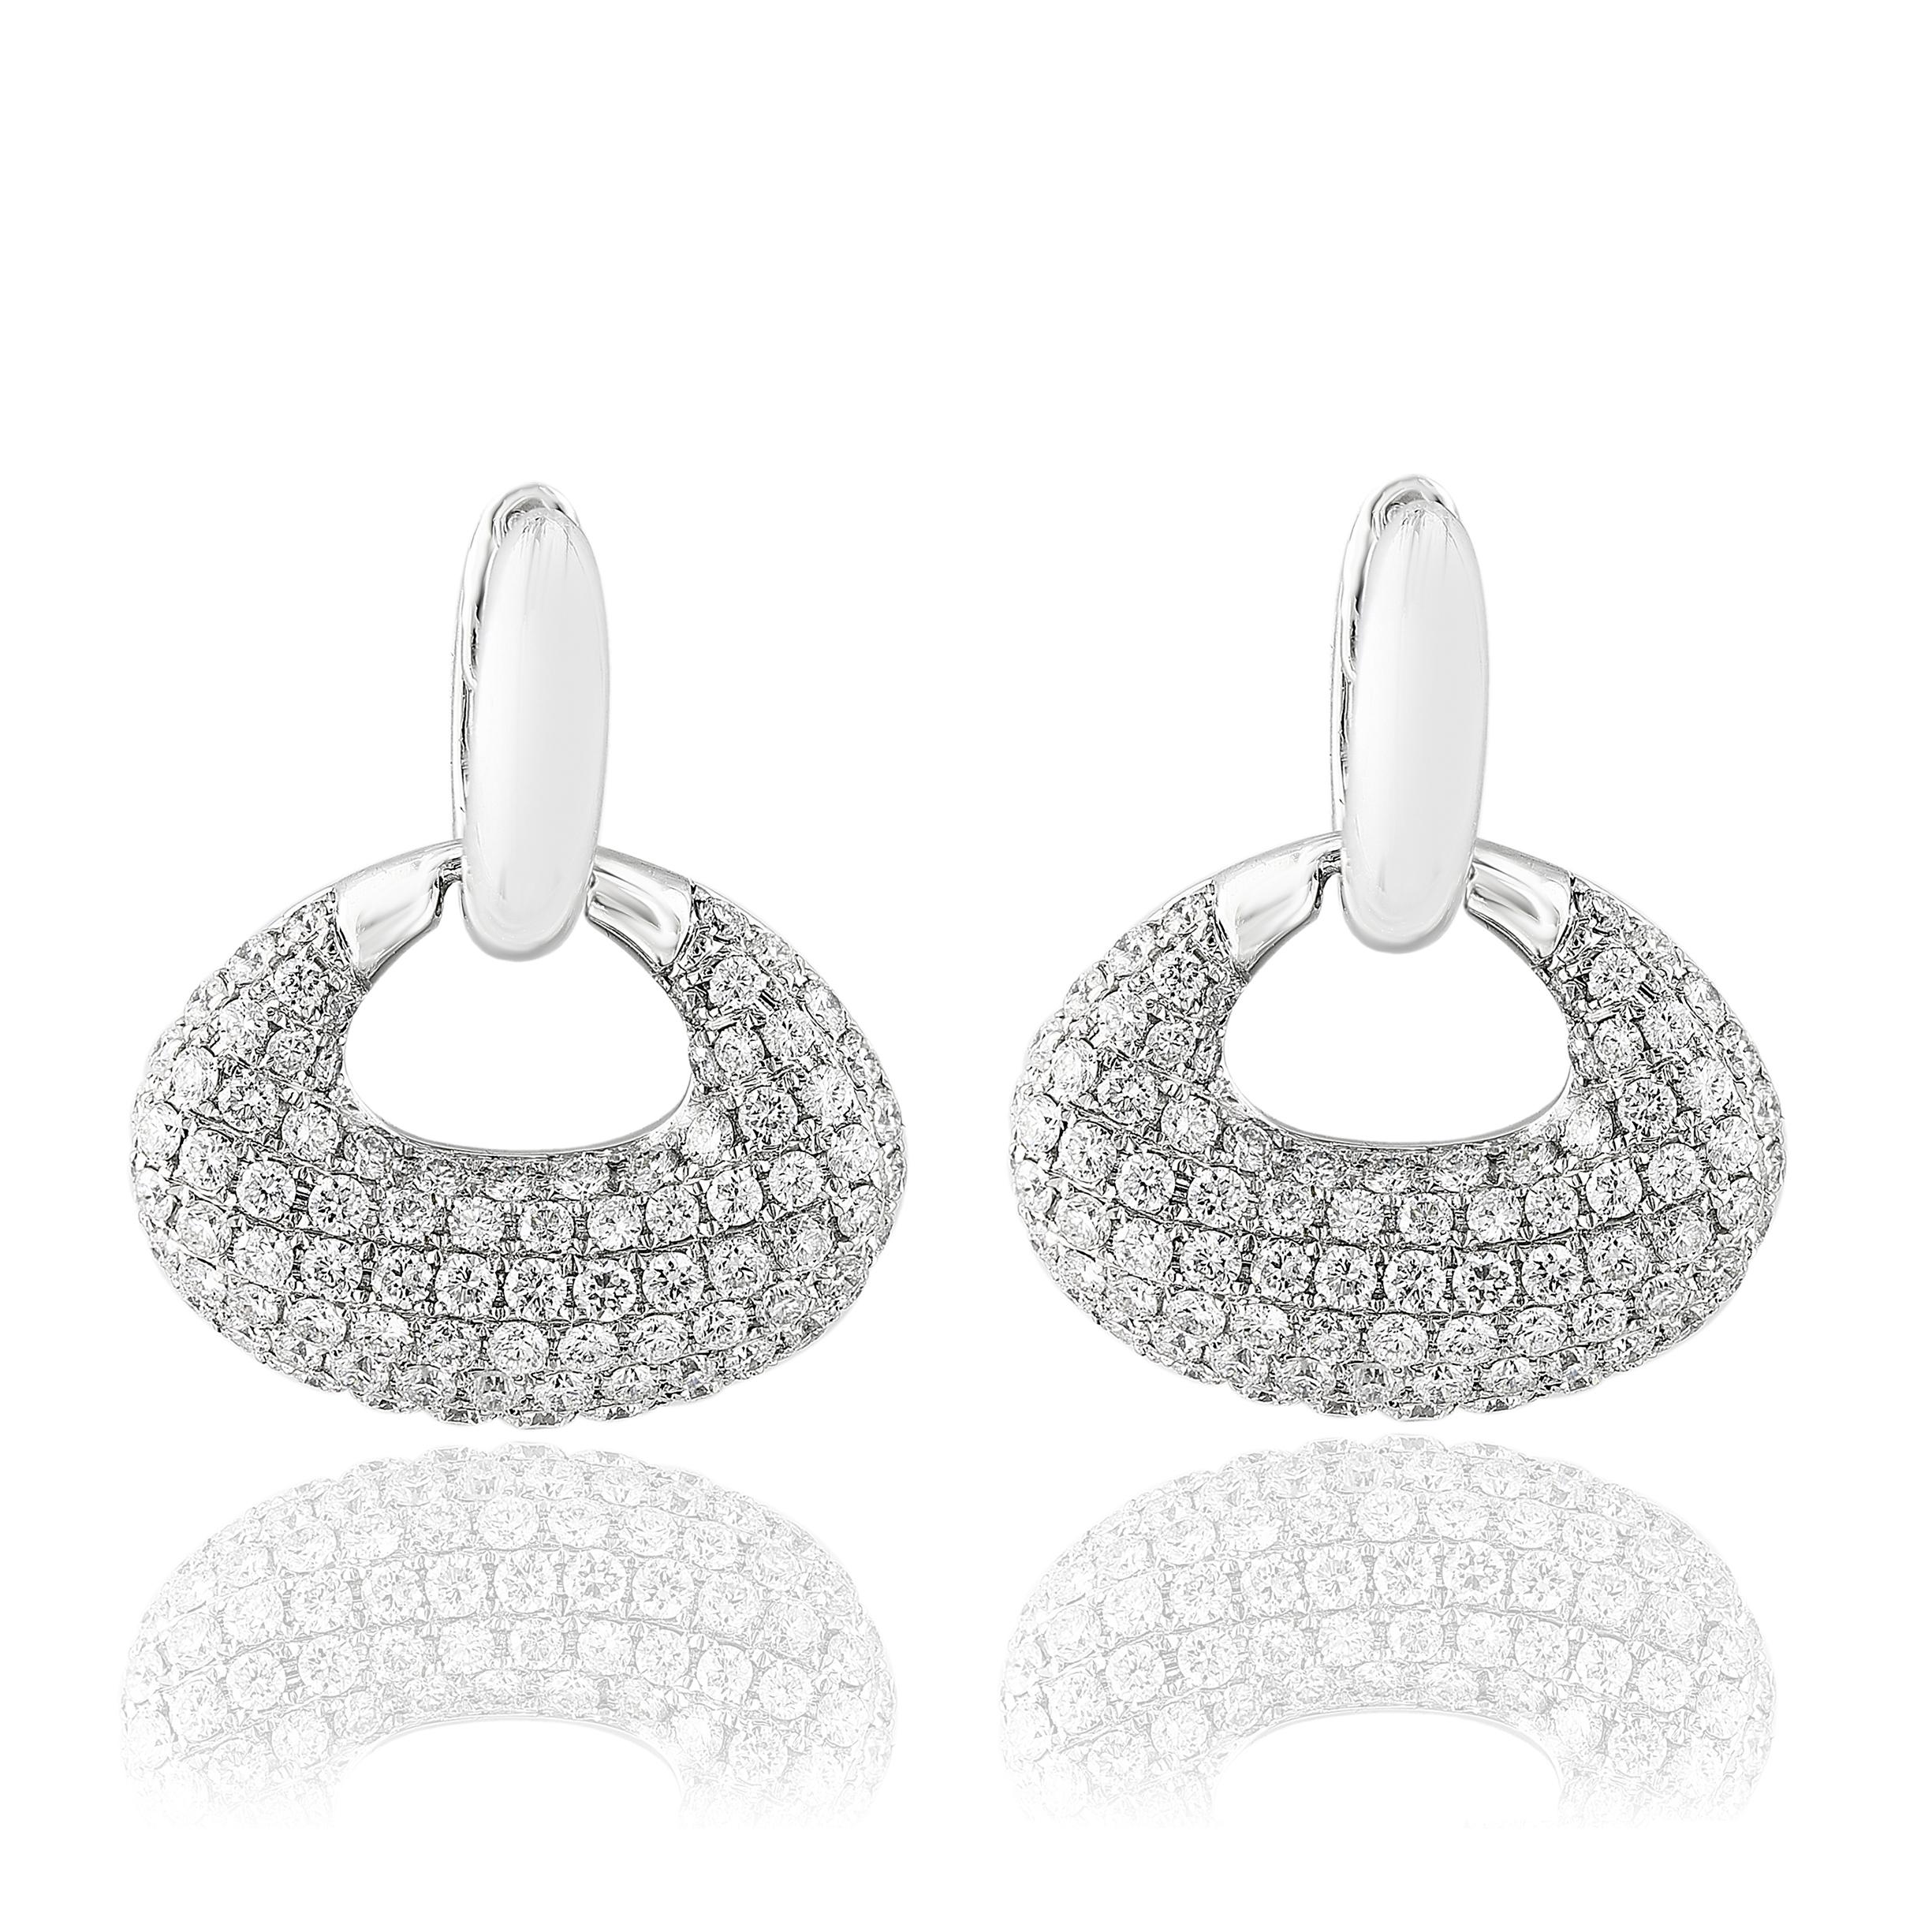 Contemporary 2.49 Carat Brilliant Cut Diamond Drop Earrings in 18K White Gold For Sale